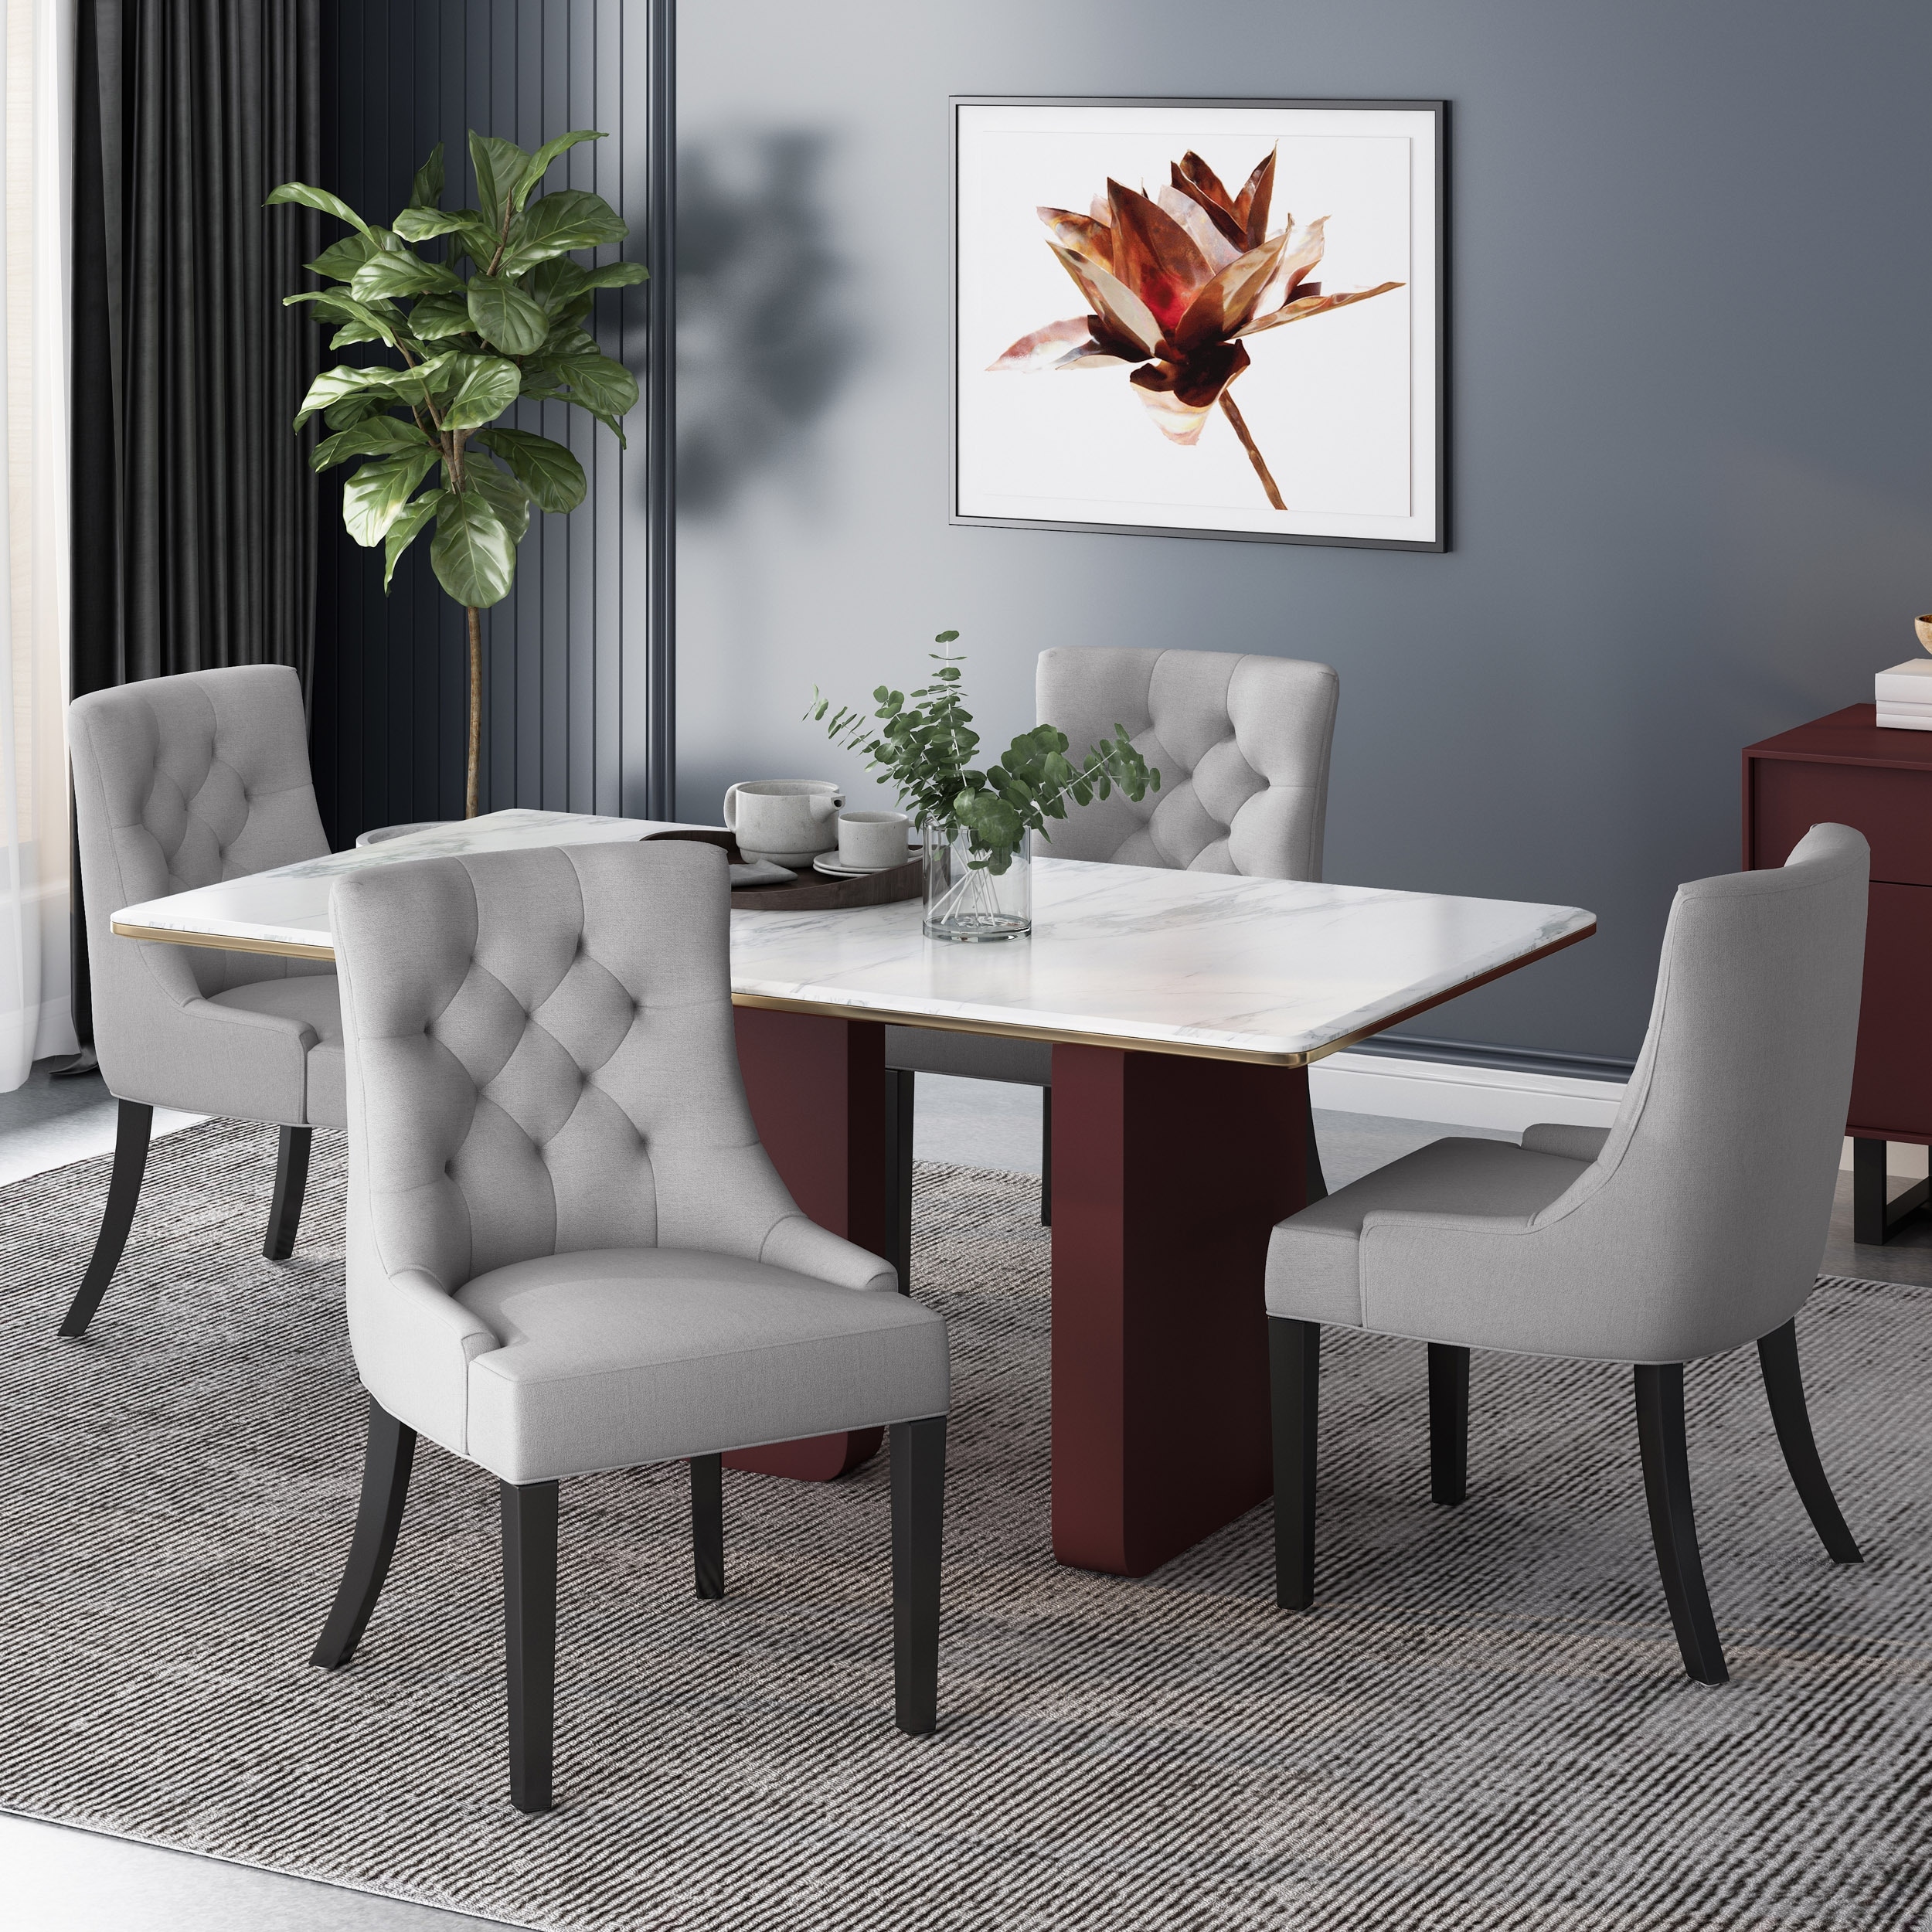 https://ak1.ostkcdn.com/images/products/is/images/direct/df4602c3e7cb76a397abbea805ae59691aa5ef23/Hayden-Modern-Tufted-Fabric-Dining-Chairs-%28Set-of-4%29-by-Christopher-Knight-Home.jpg